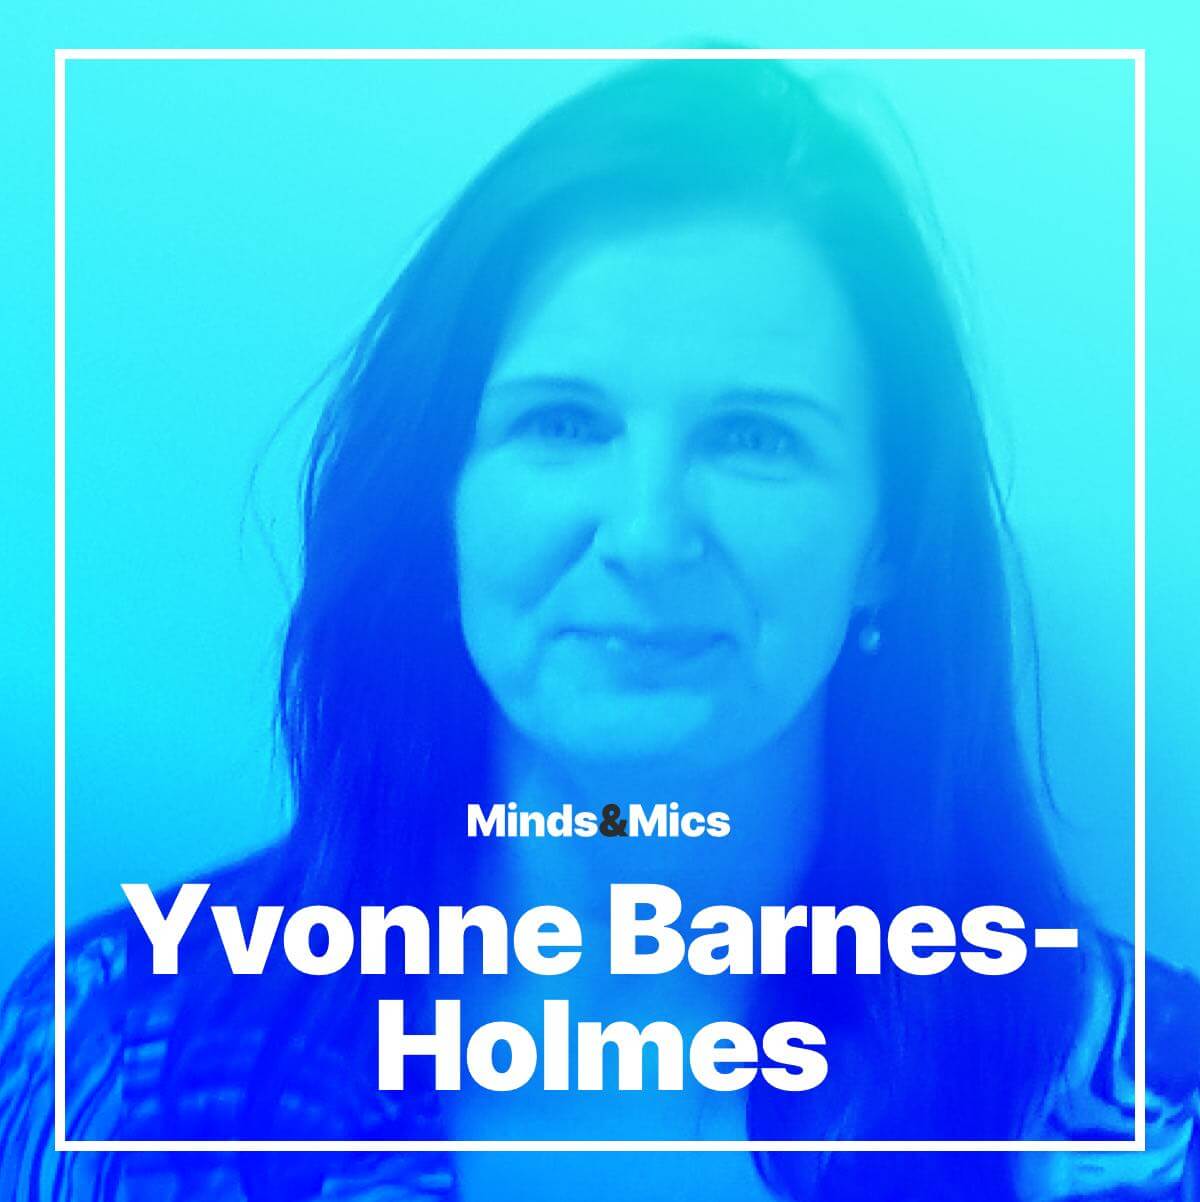 Yvonne Barnes-Homes Minds and Mics Wignall